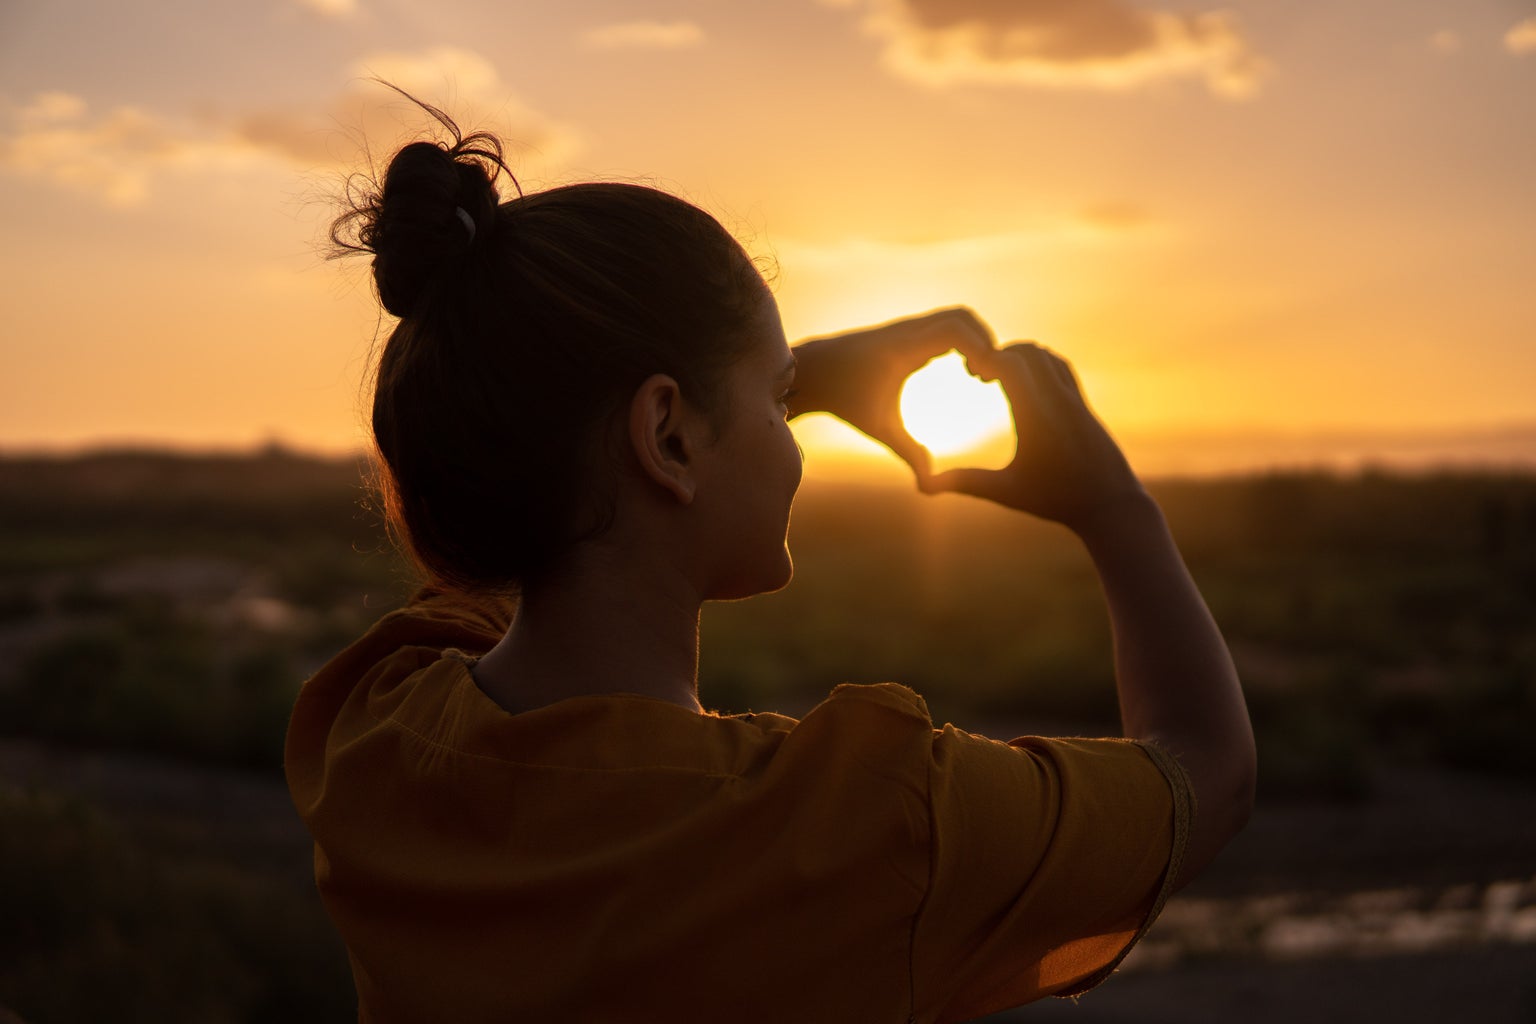 girl making a heart with her hands over a sunset